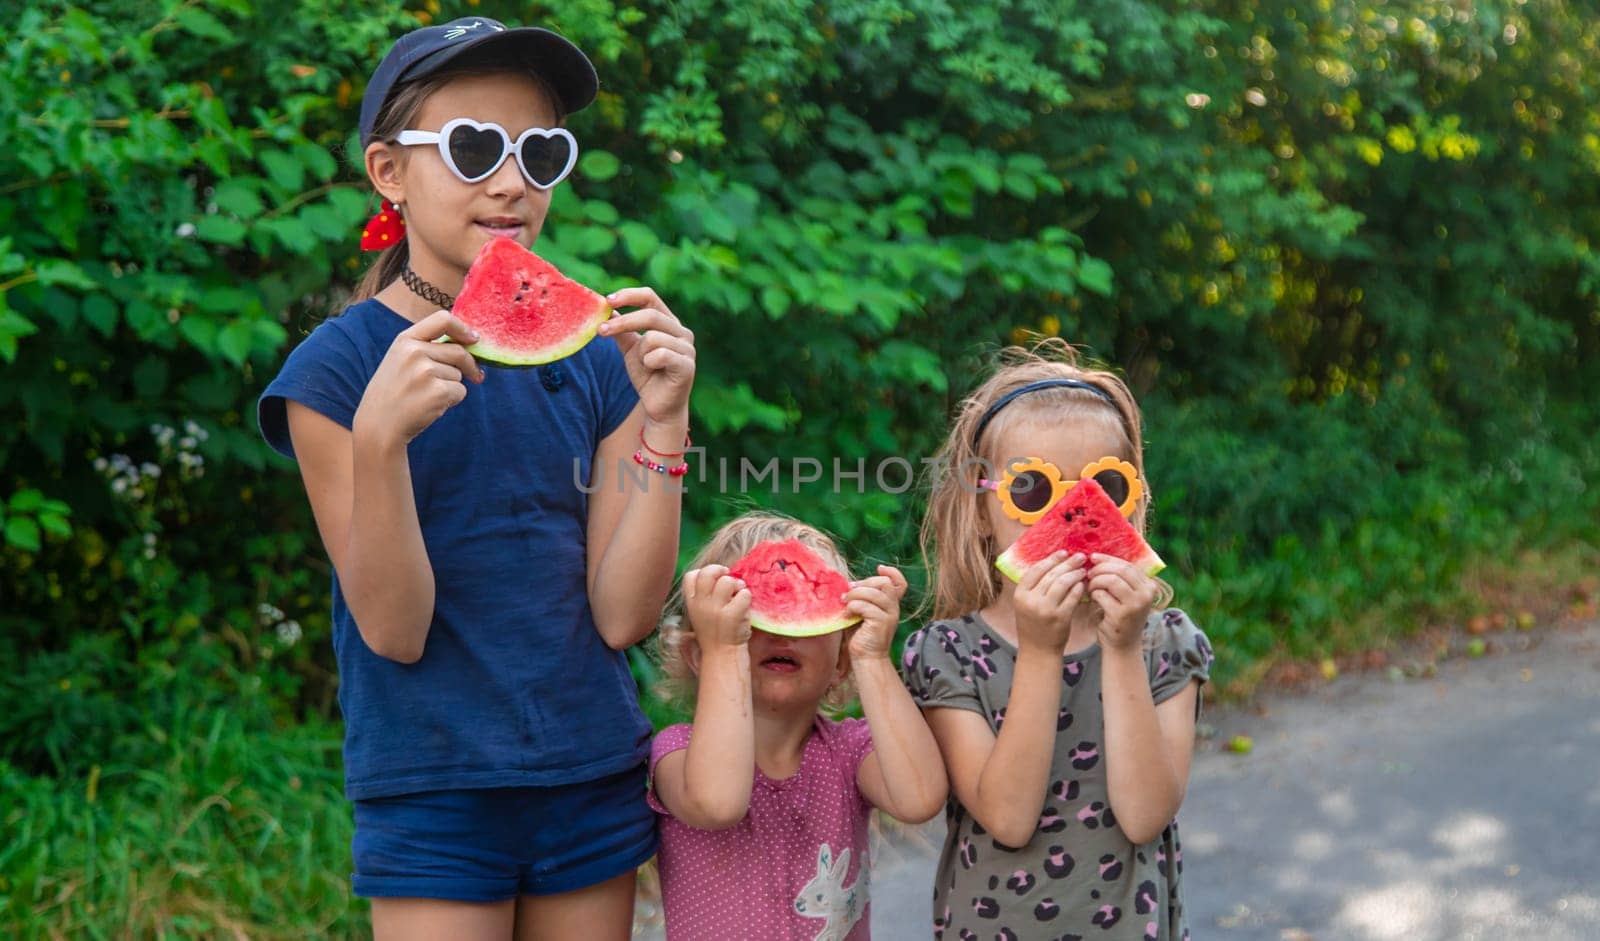 Children in the park eat watermelon. Selective focus. Food.